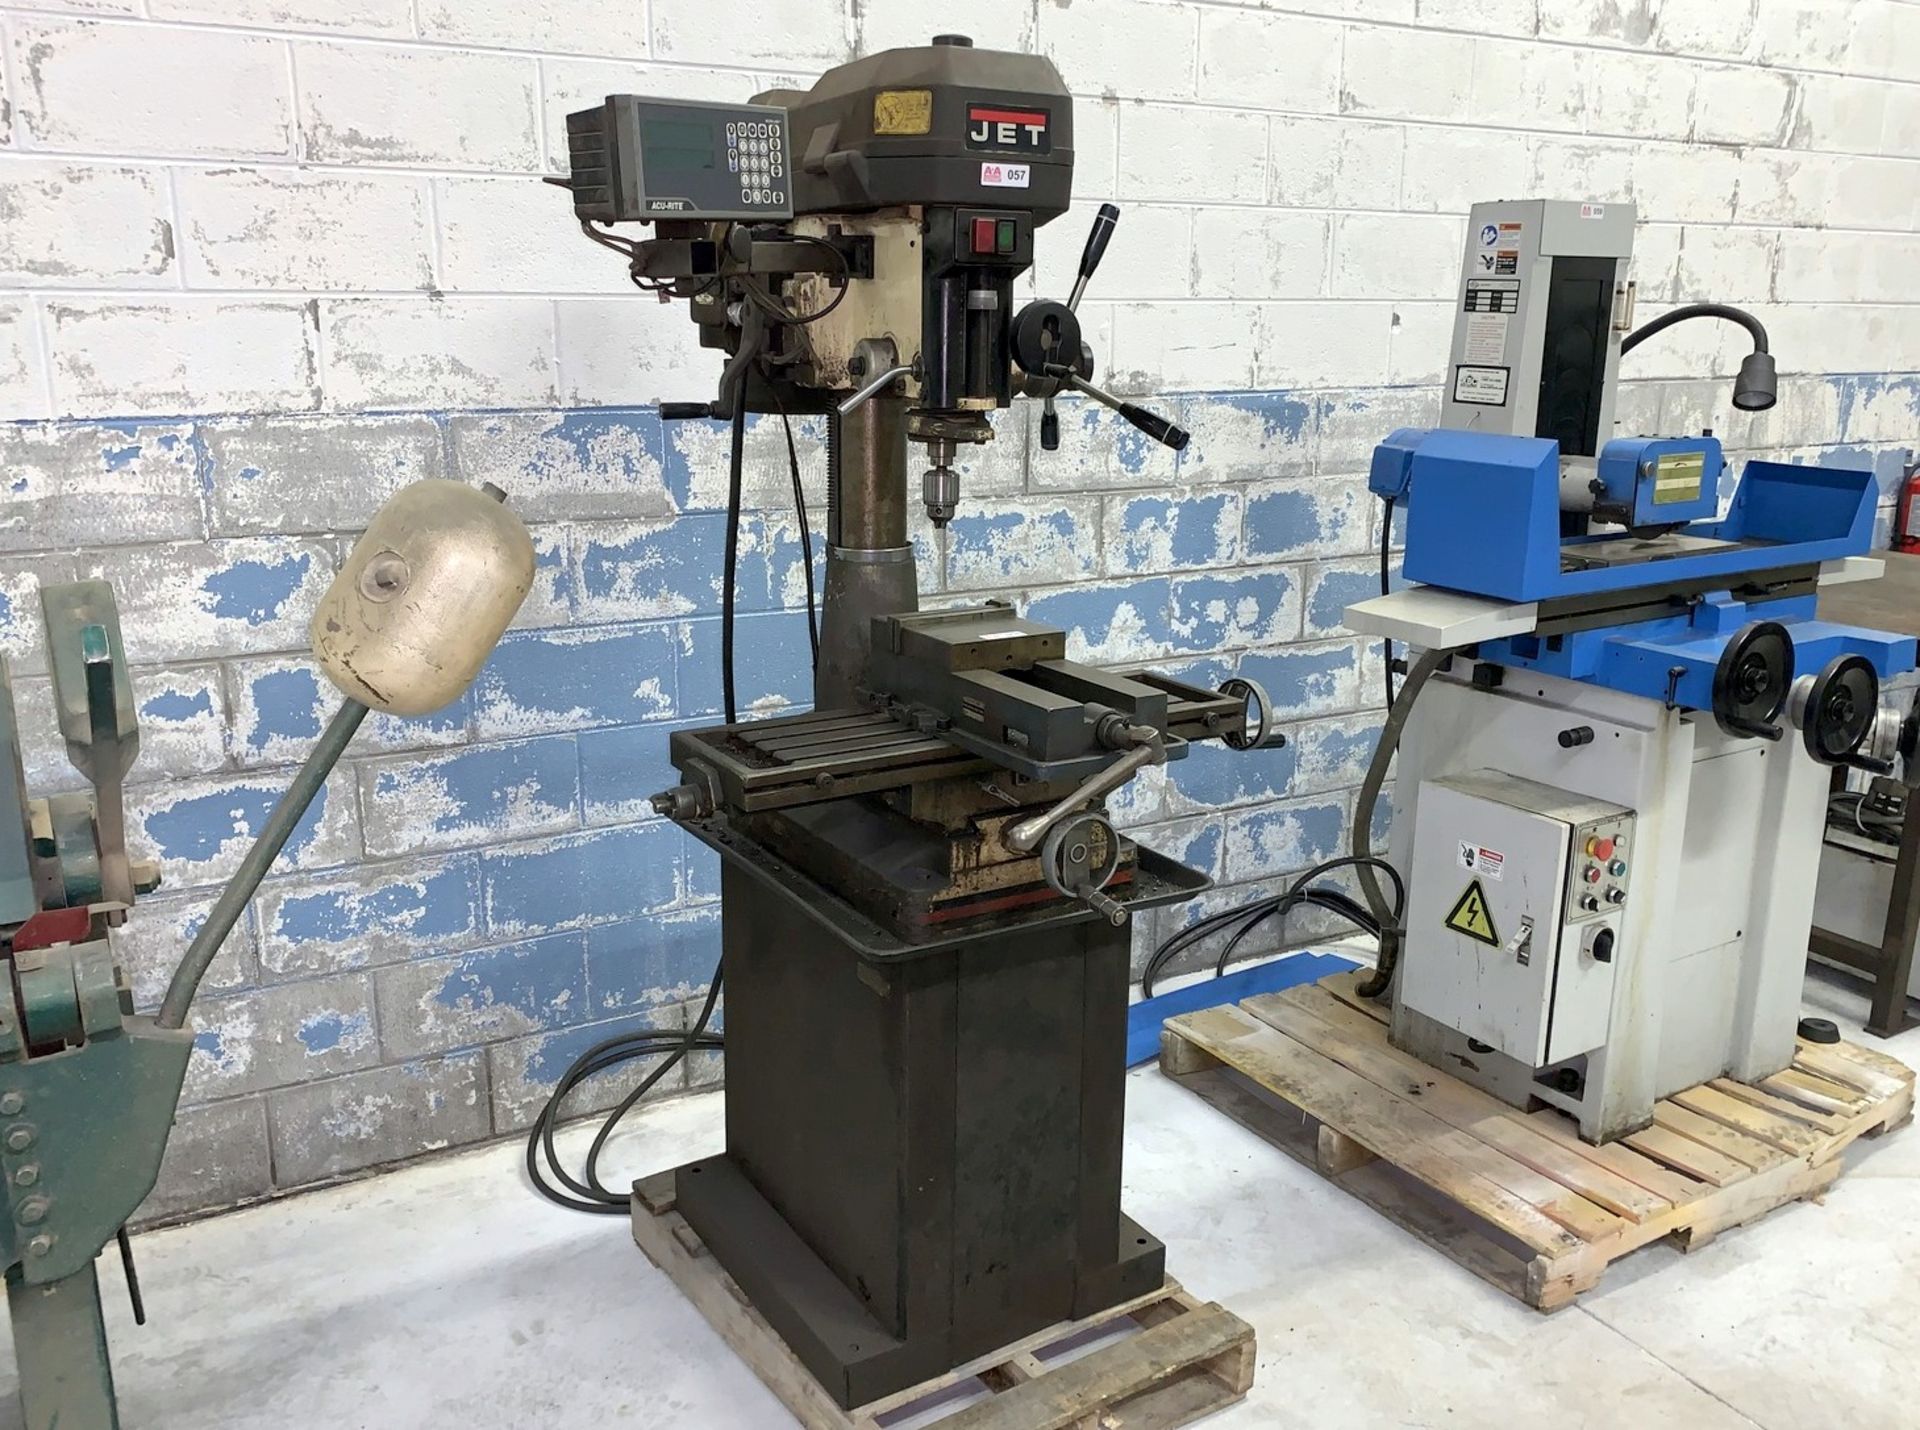 Jet Mdl. JMD-18 Vertical Milling / Drilling Machine, 18" Swing, 9" x 32" T-Slot Table (NOTE: Vise is